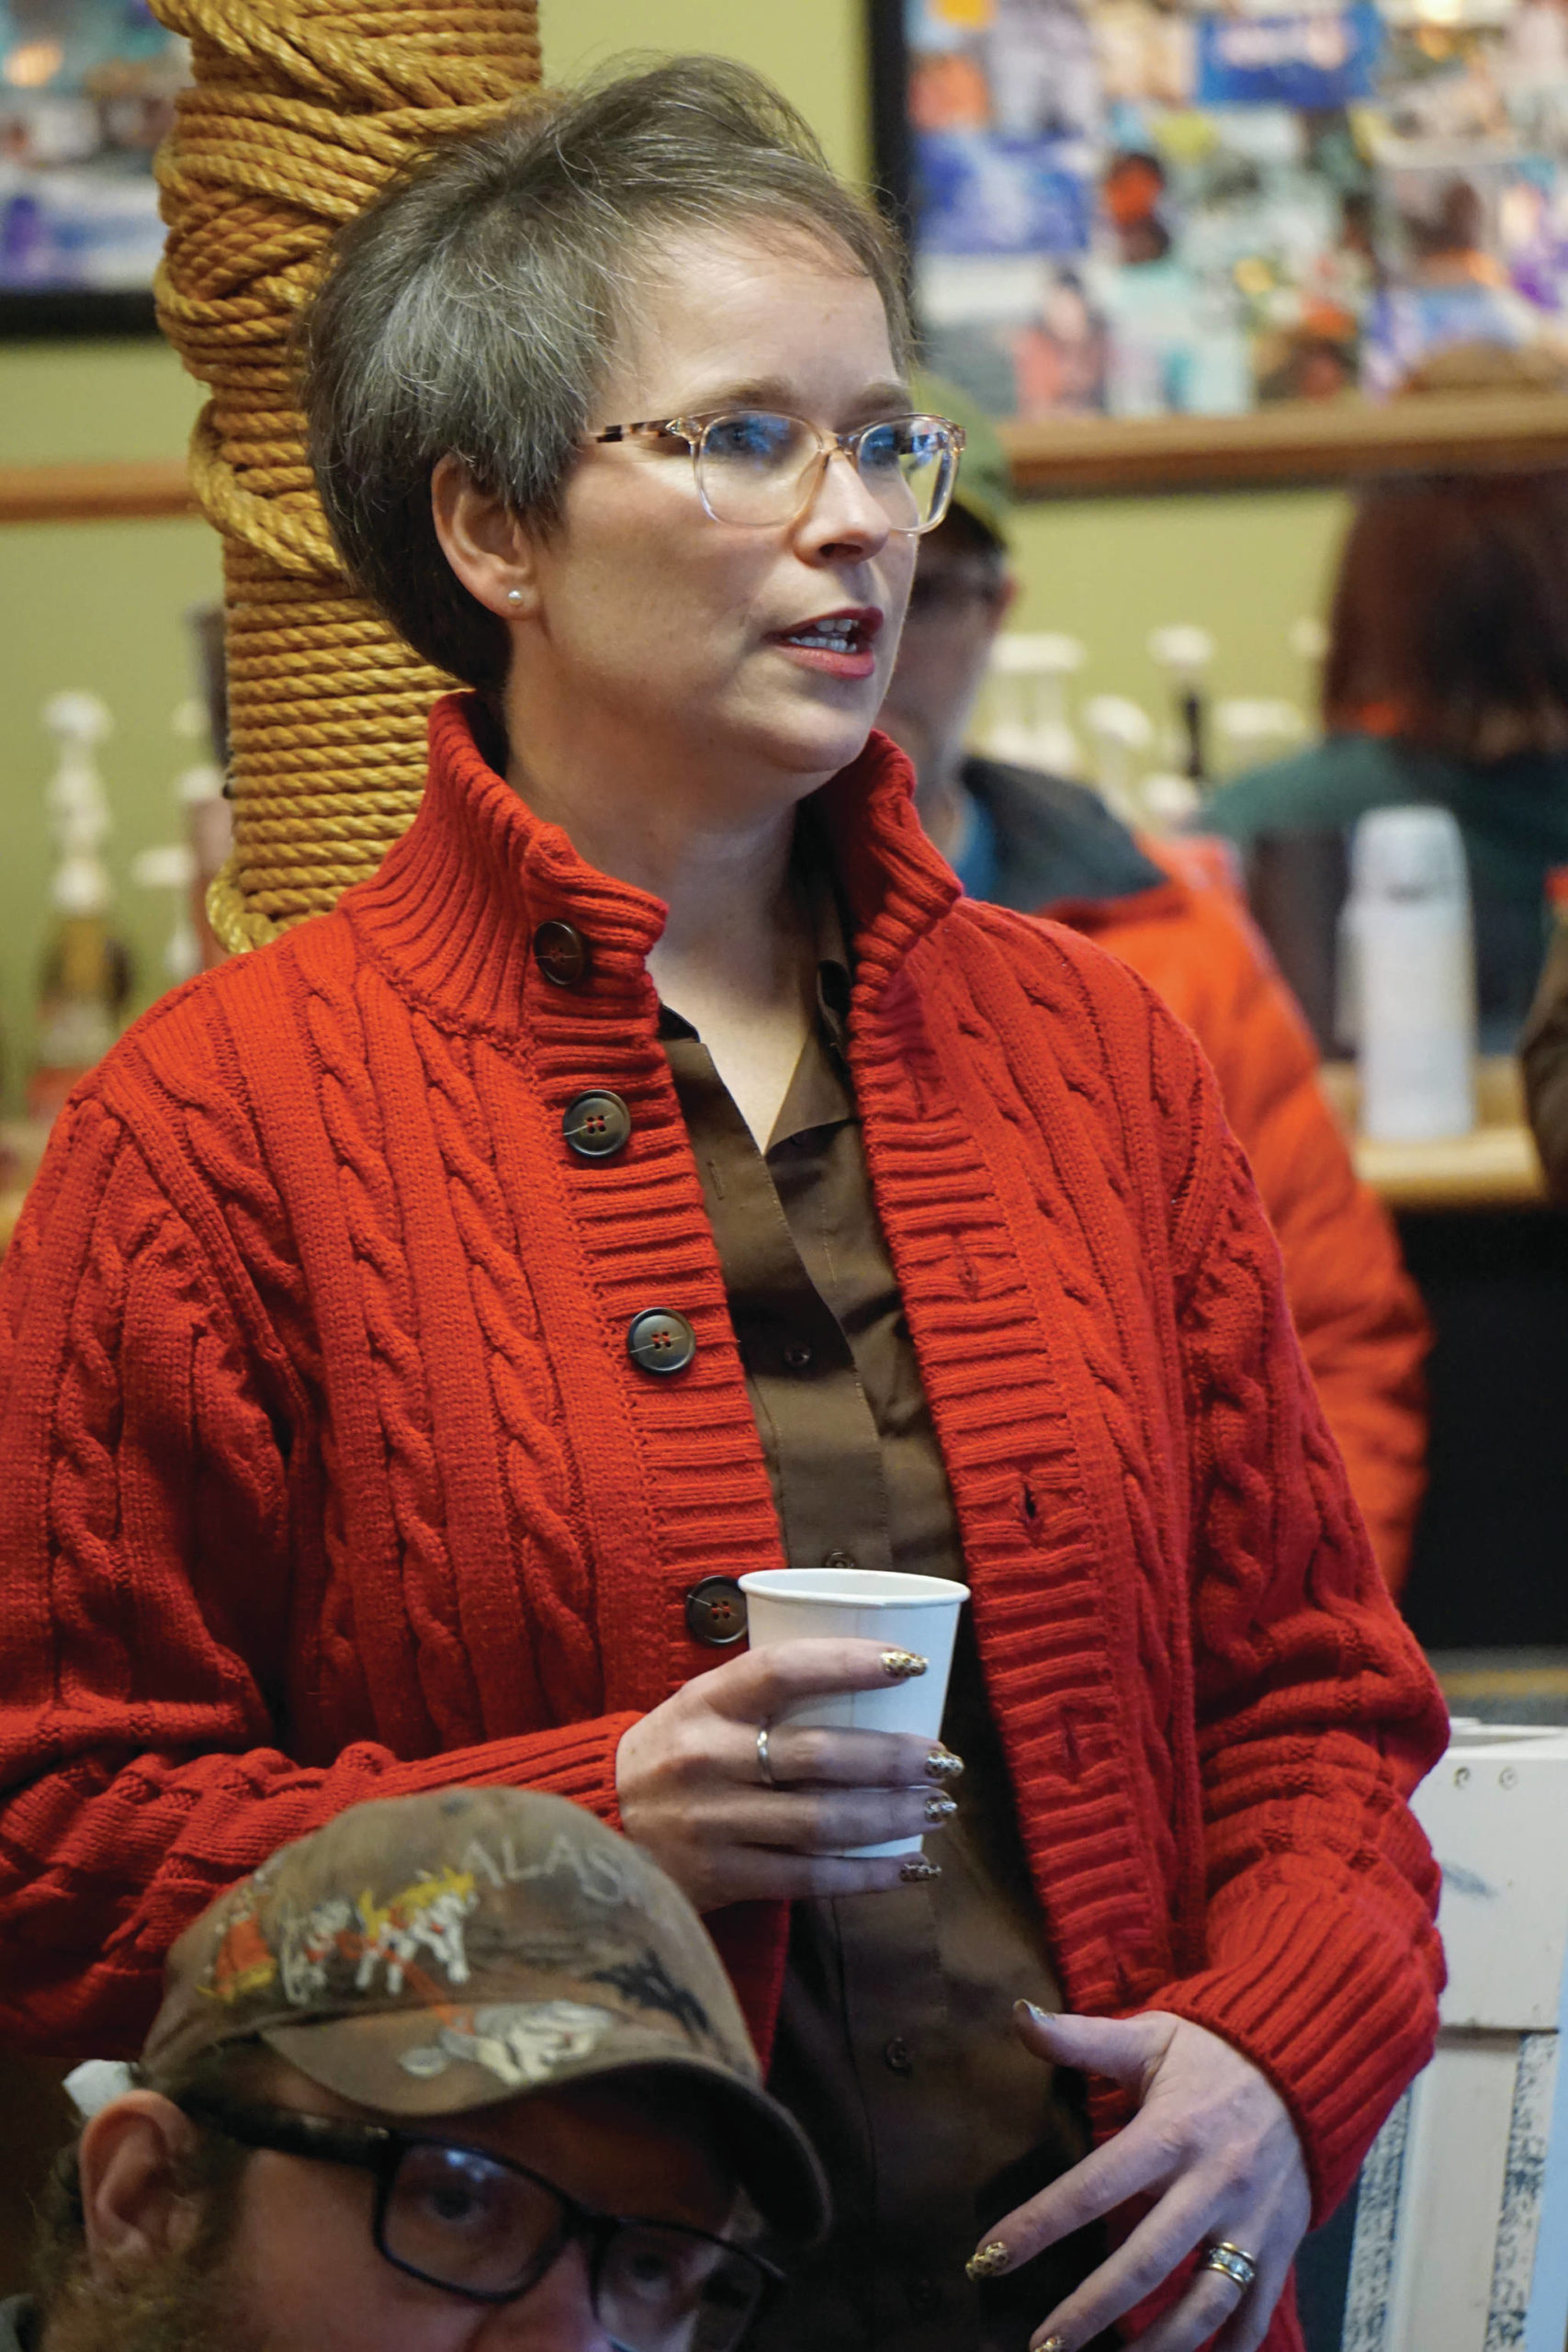 Rep. Sarah Vance, R-Homer, speaks at a town hall meeting on Monday, March 29, 2021, at Captain’s Coffee in Homer, Alaska. (Photo by Michael Armstrong/Homer News)